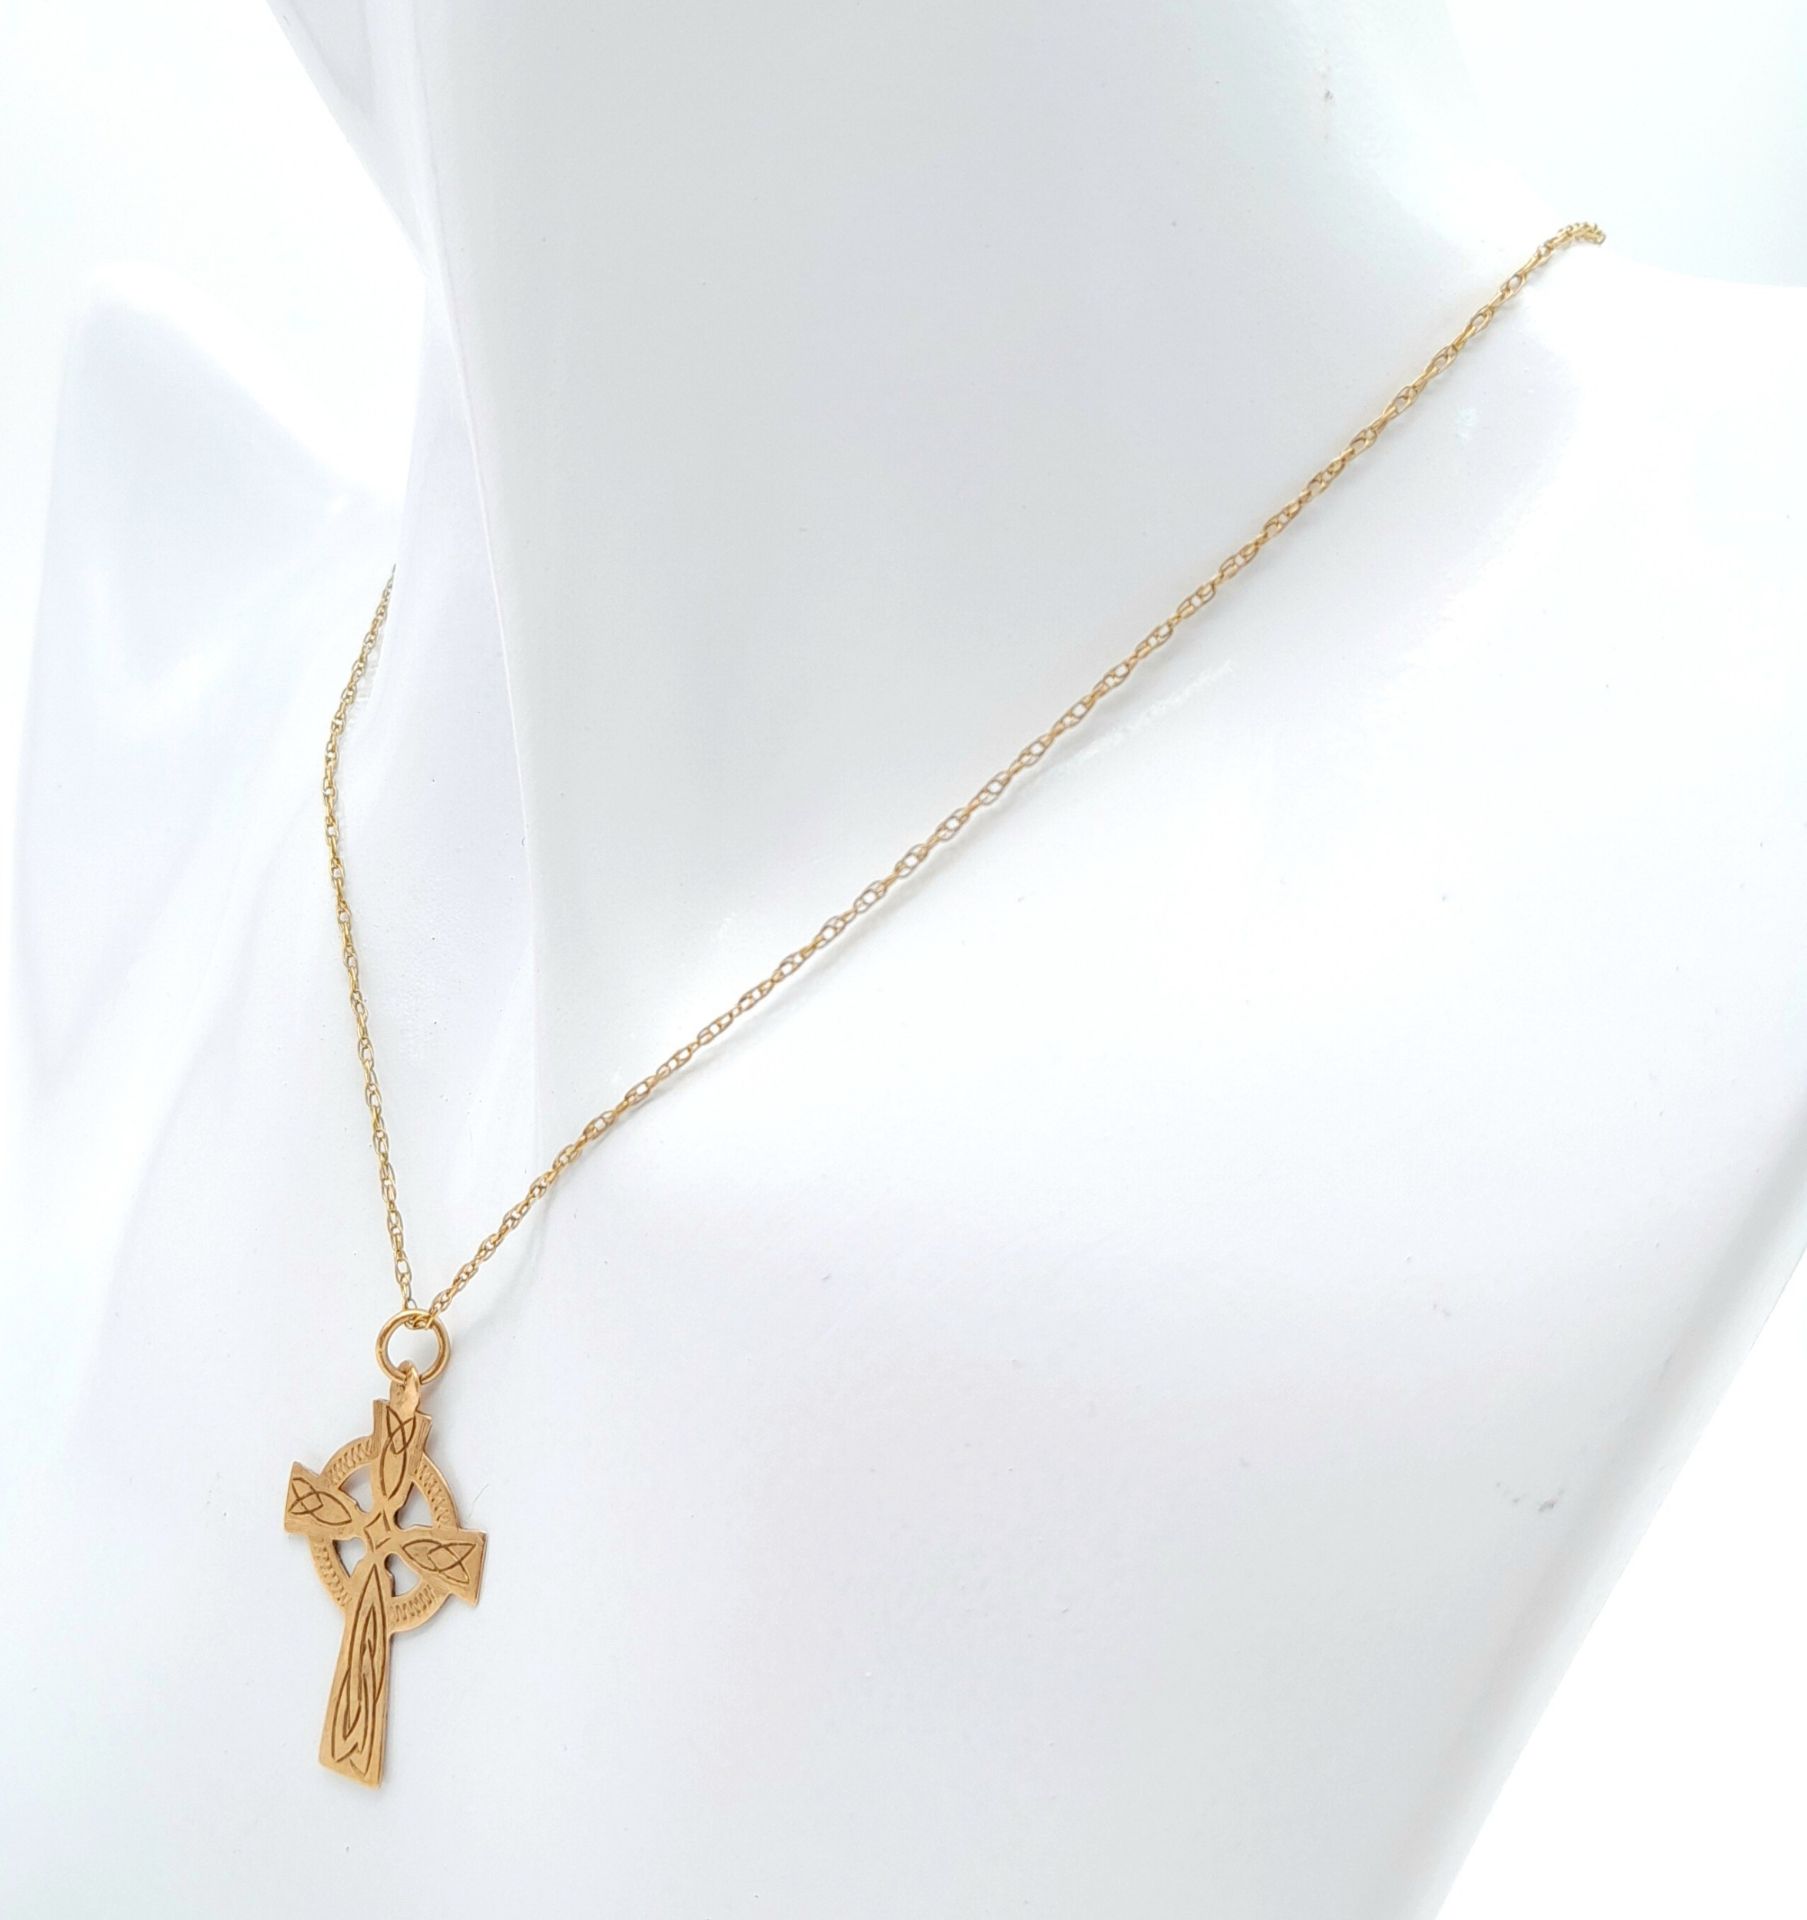 A 9 K yellow chain necklace with a Celtic cross pendant. Chain length: 46 cm, weight: 1.7 g. - Image 2 of 5